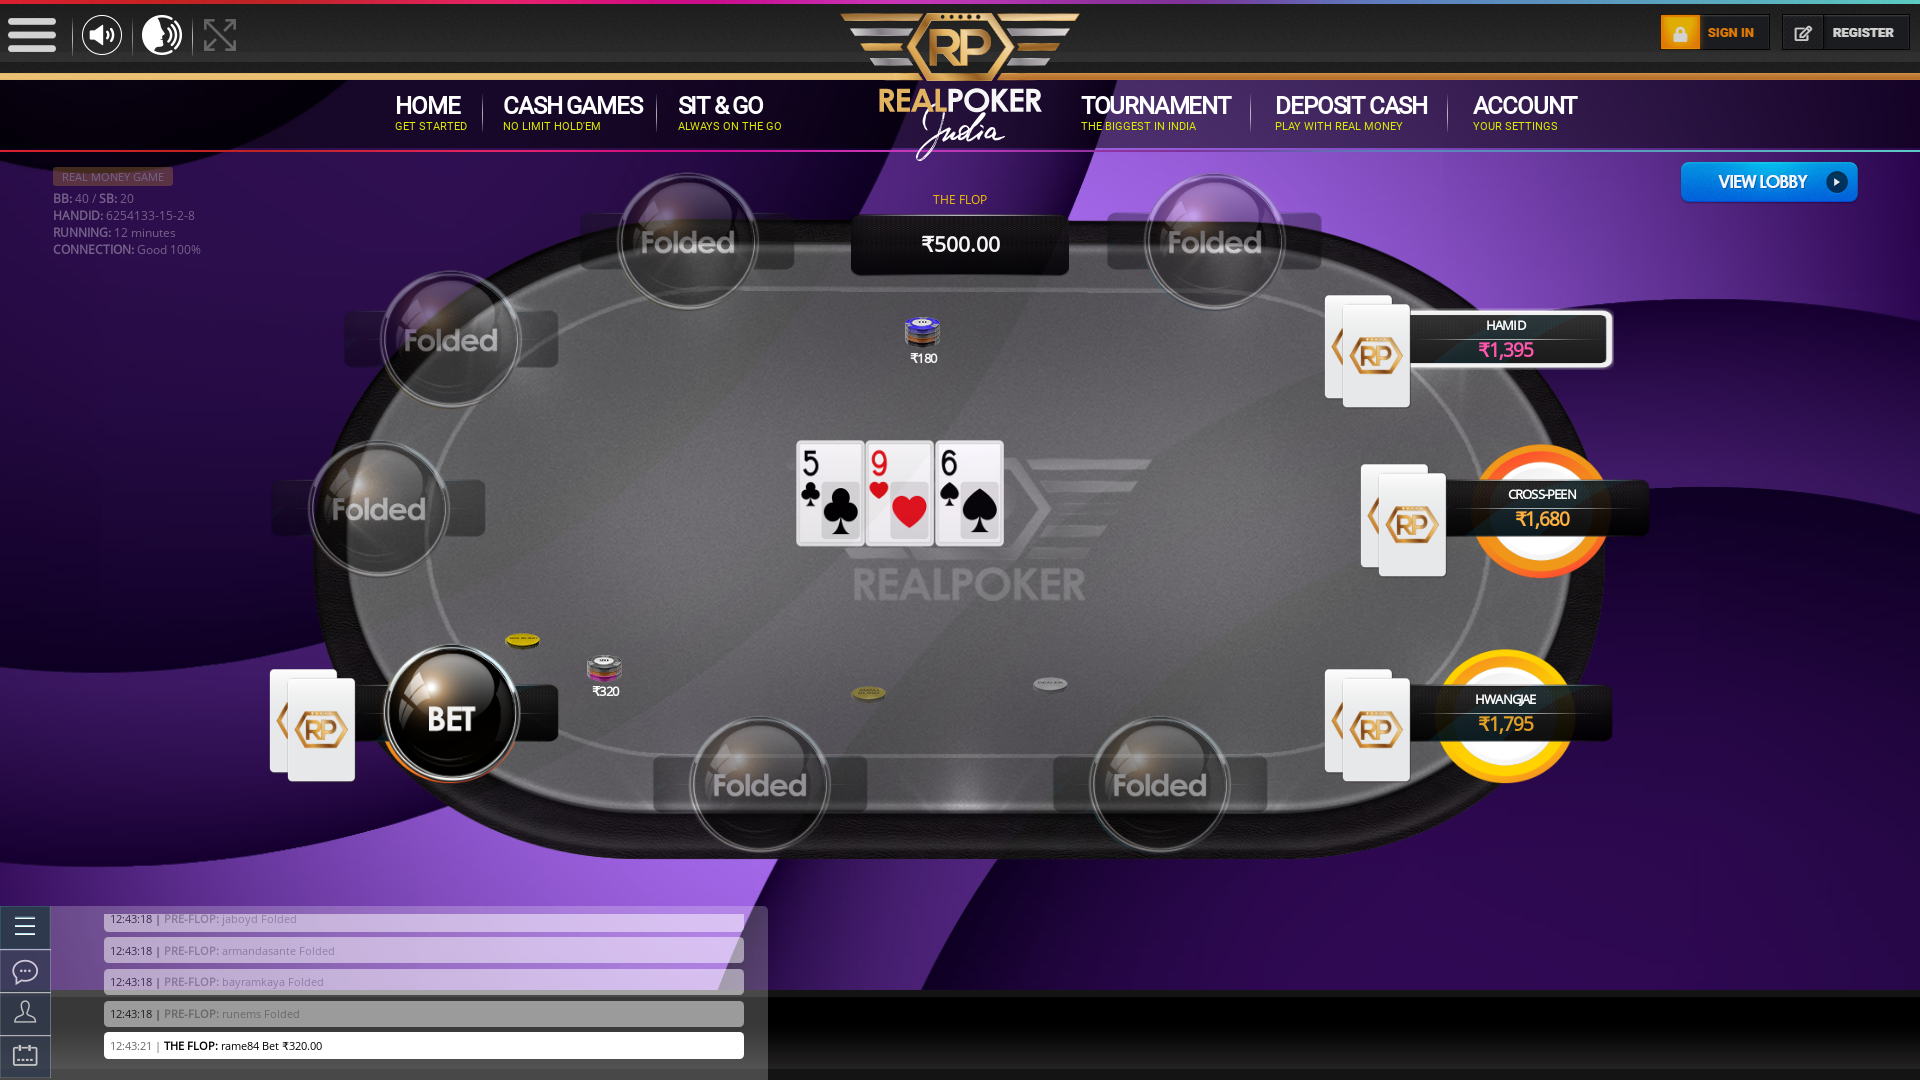 Alipore, Kolkata poker table on a 10 player table in the 12th minute of the game